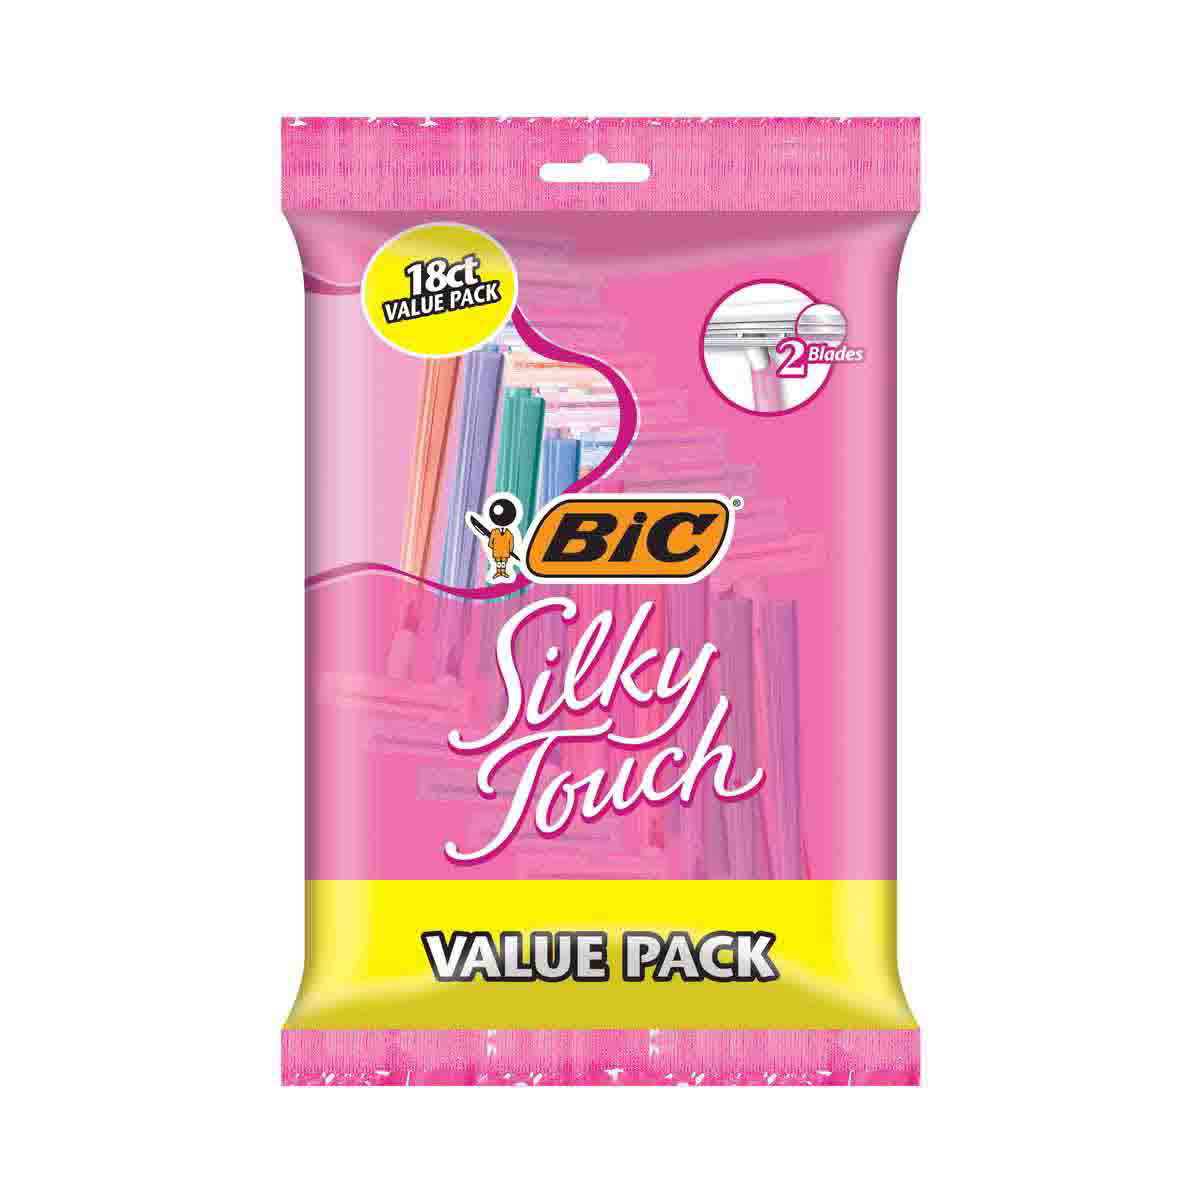 BIC Silky Touch Women's Disposable Razors, 18 Pack